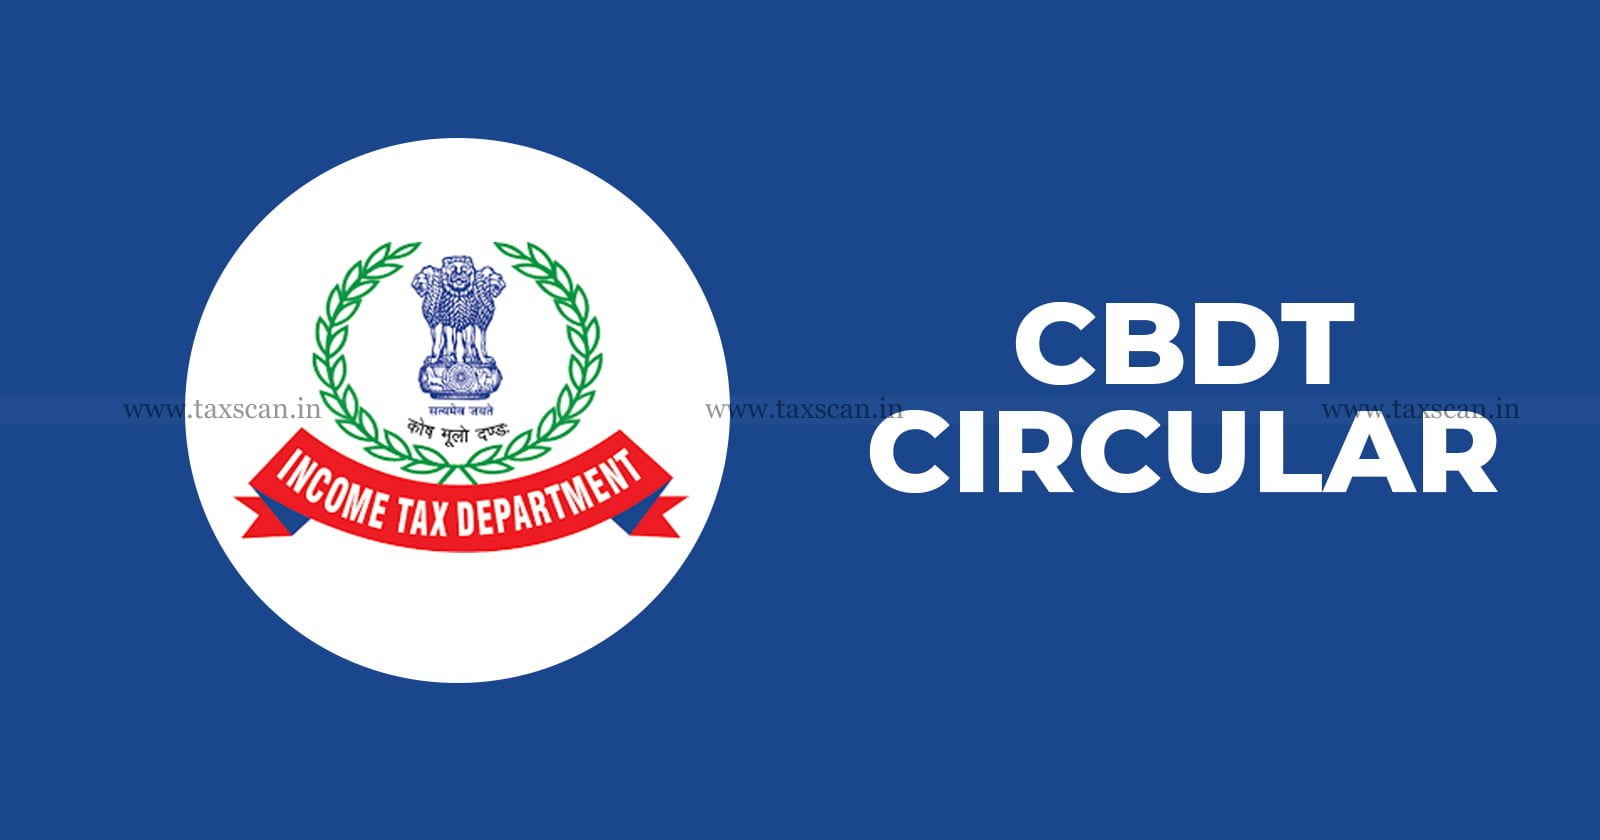 Transaction of shares not being in penny stocks covered by CBDT Circular - ITAT upholds order of DCIT - TAXSCAN